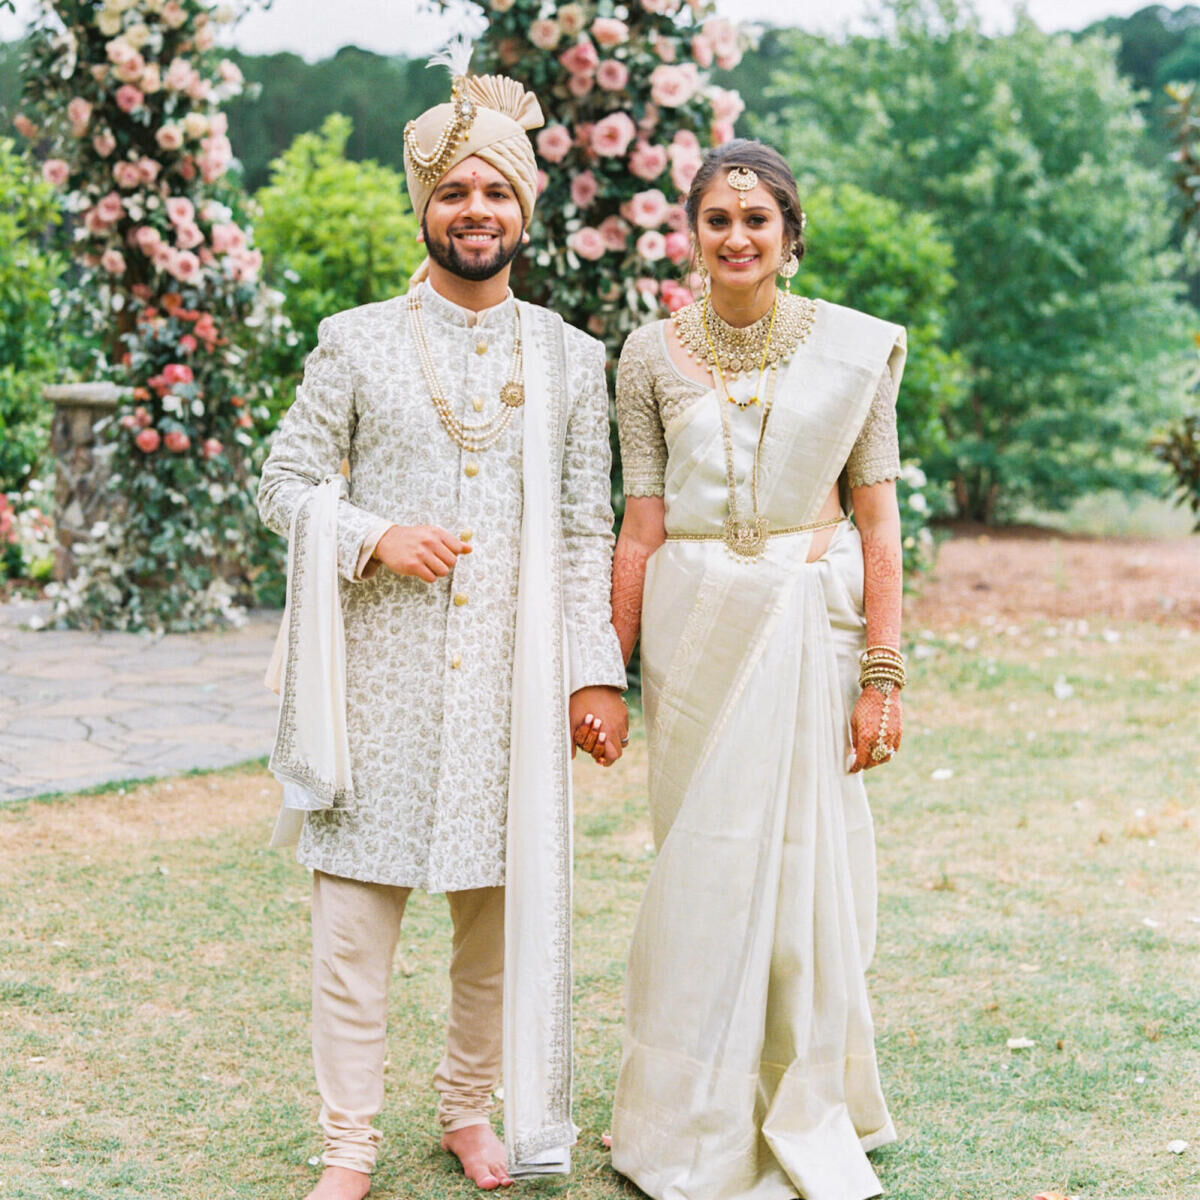 Indian Bridal Trousseau: Closet for Festivals, Family Functions, Dinner  Dates, Cocktail Parties & more!